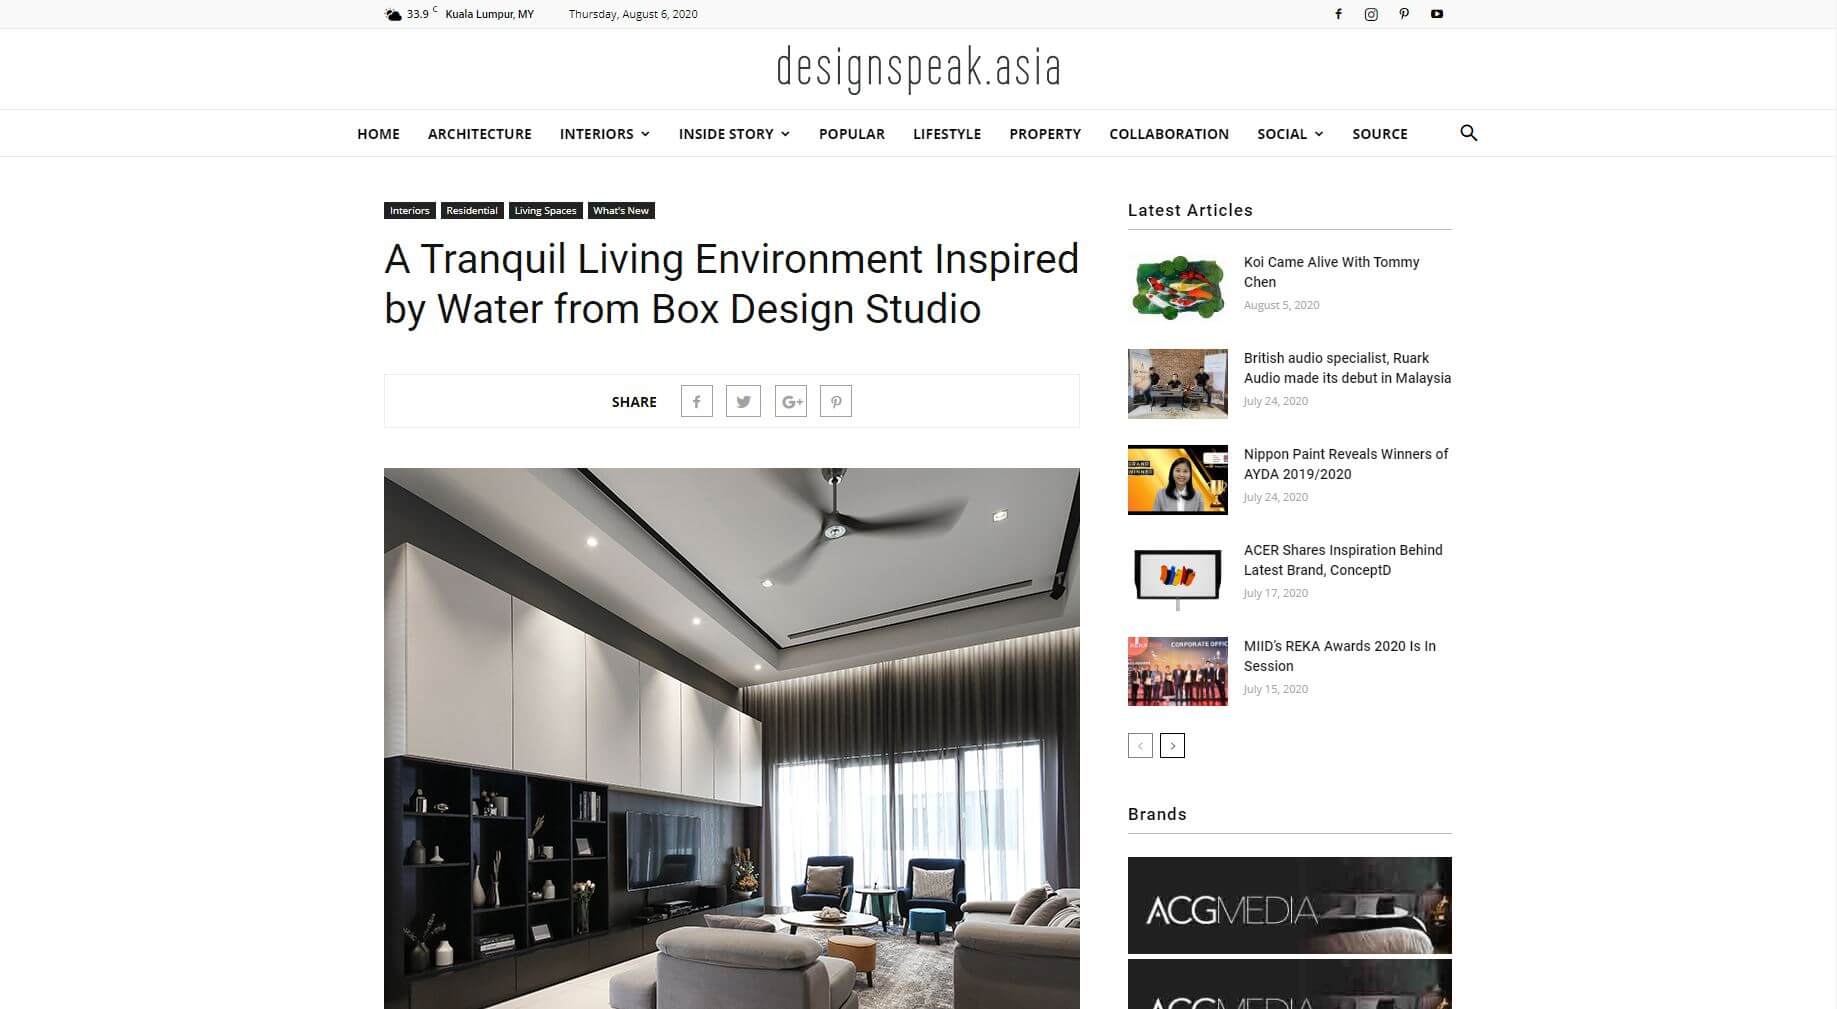 A Tranquil Living Environment Inspired by Water from Box Design Studio, December 2018